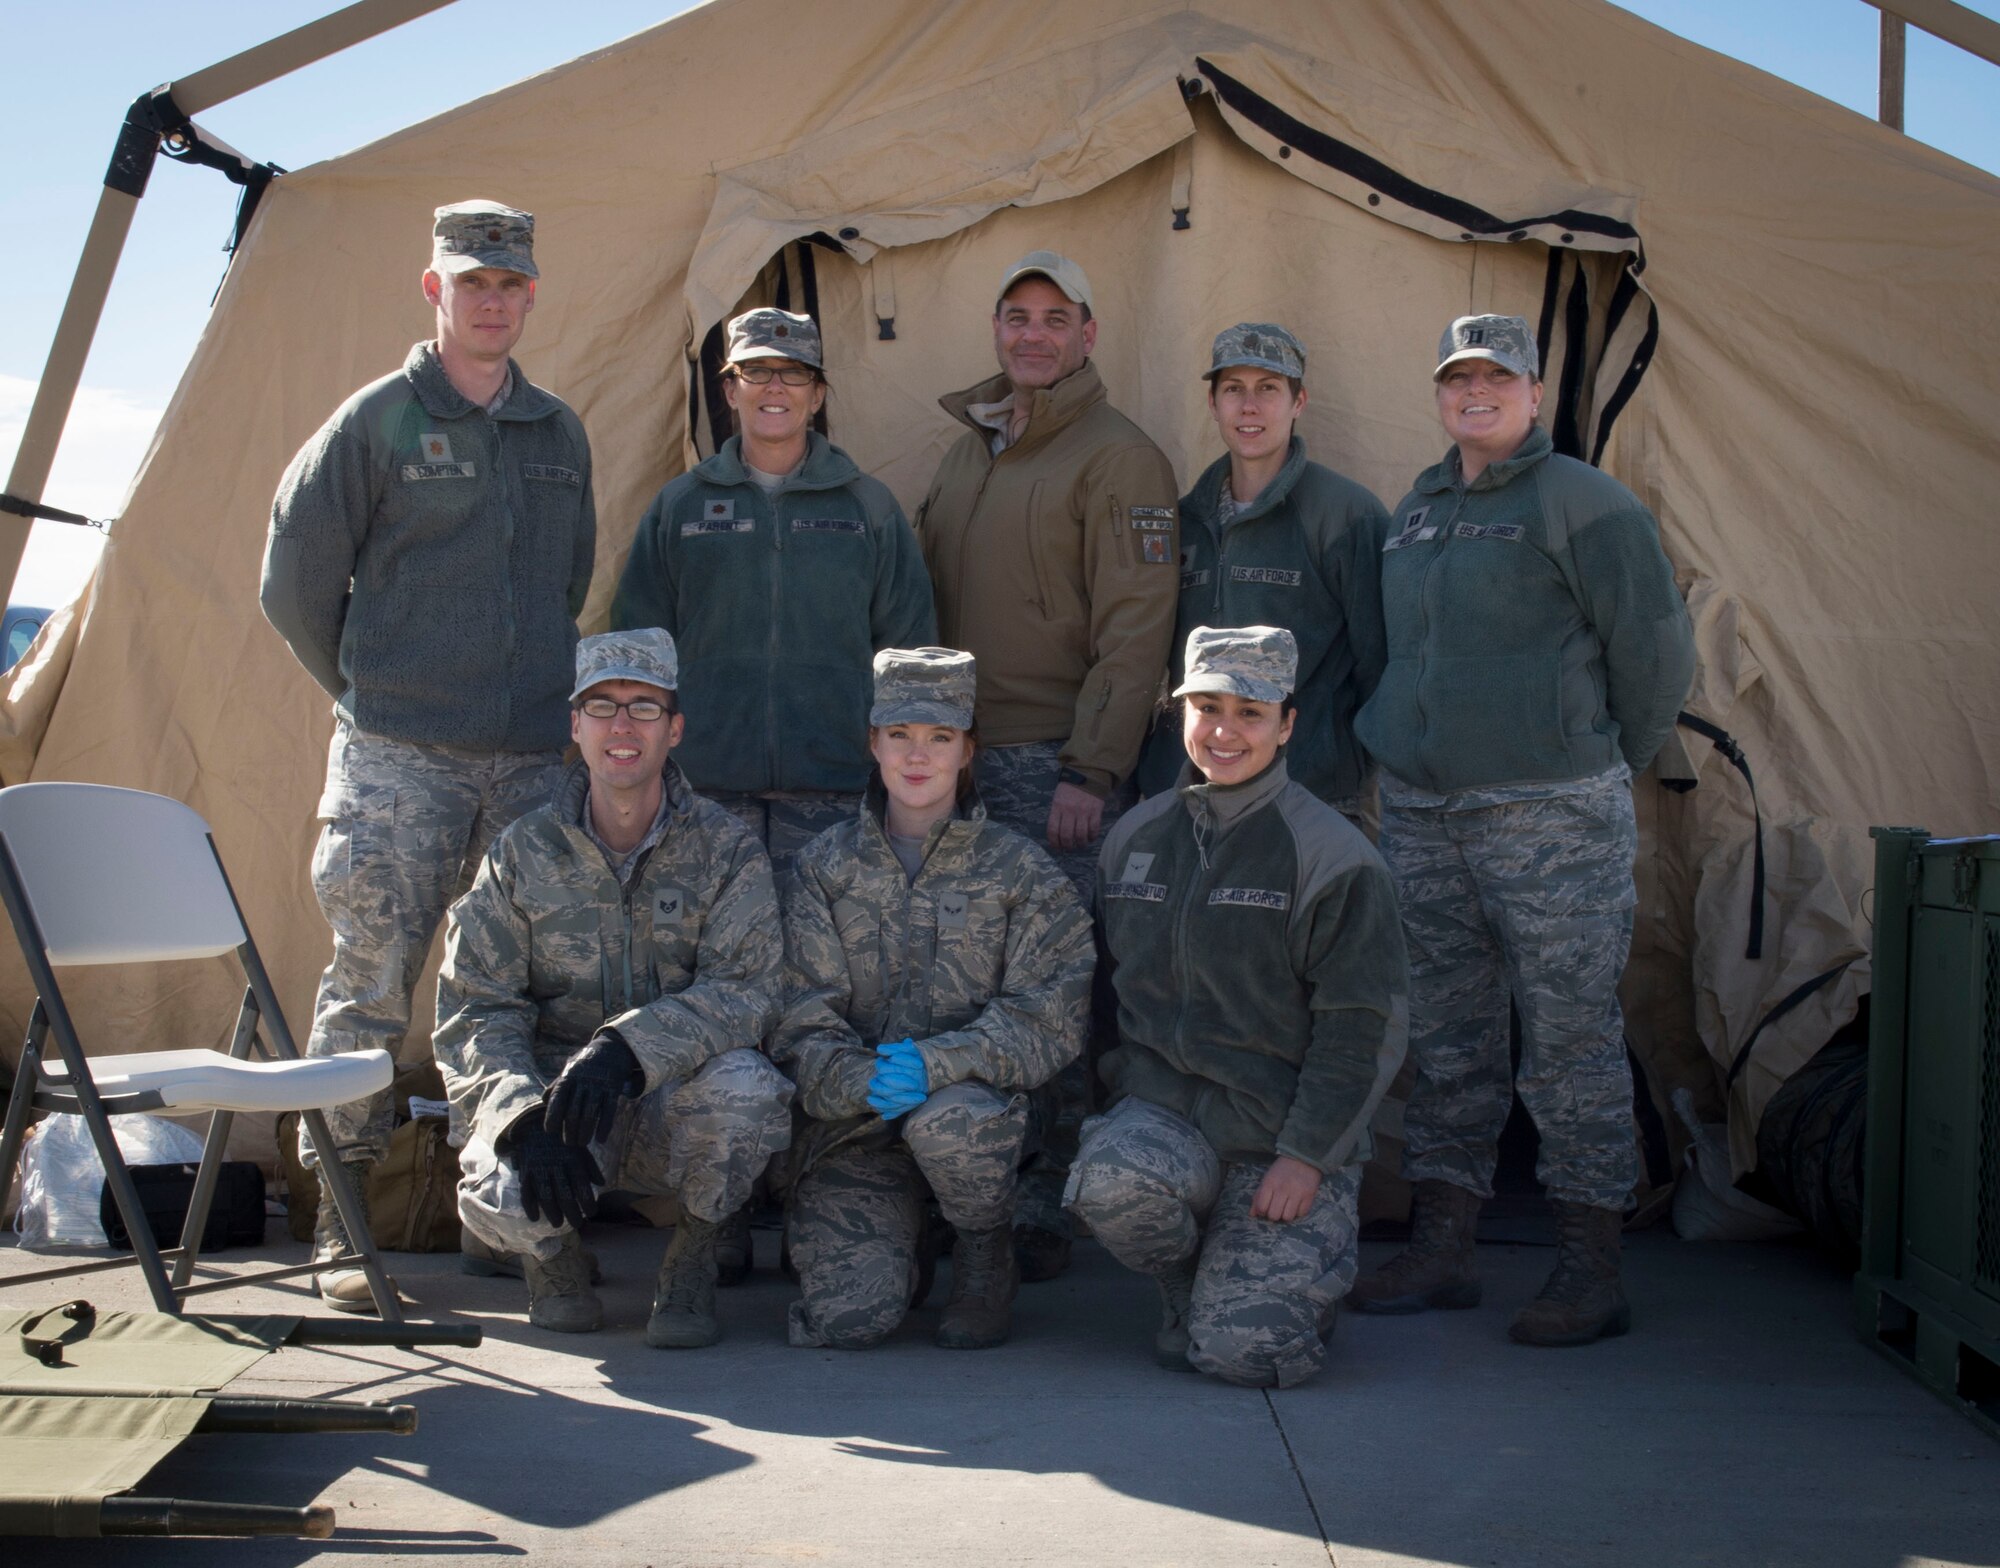 A surgical team poses for a group photo at Mountain Home Air Force Base, Idaho, Nov. 5, 2015. The surgical team included guardsmen from Fairchild AFB, Washington. They participated in Gunfighter Flag 16-1 exercise to train realistically for deployment missions. (U.S. Air Force photo by Airman 1st Class Jessica H. Evans/RELEASED)